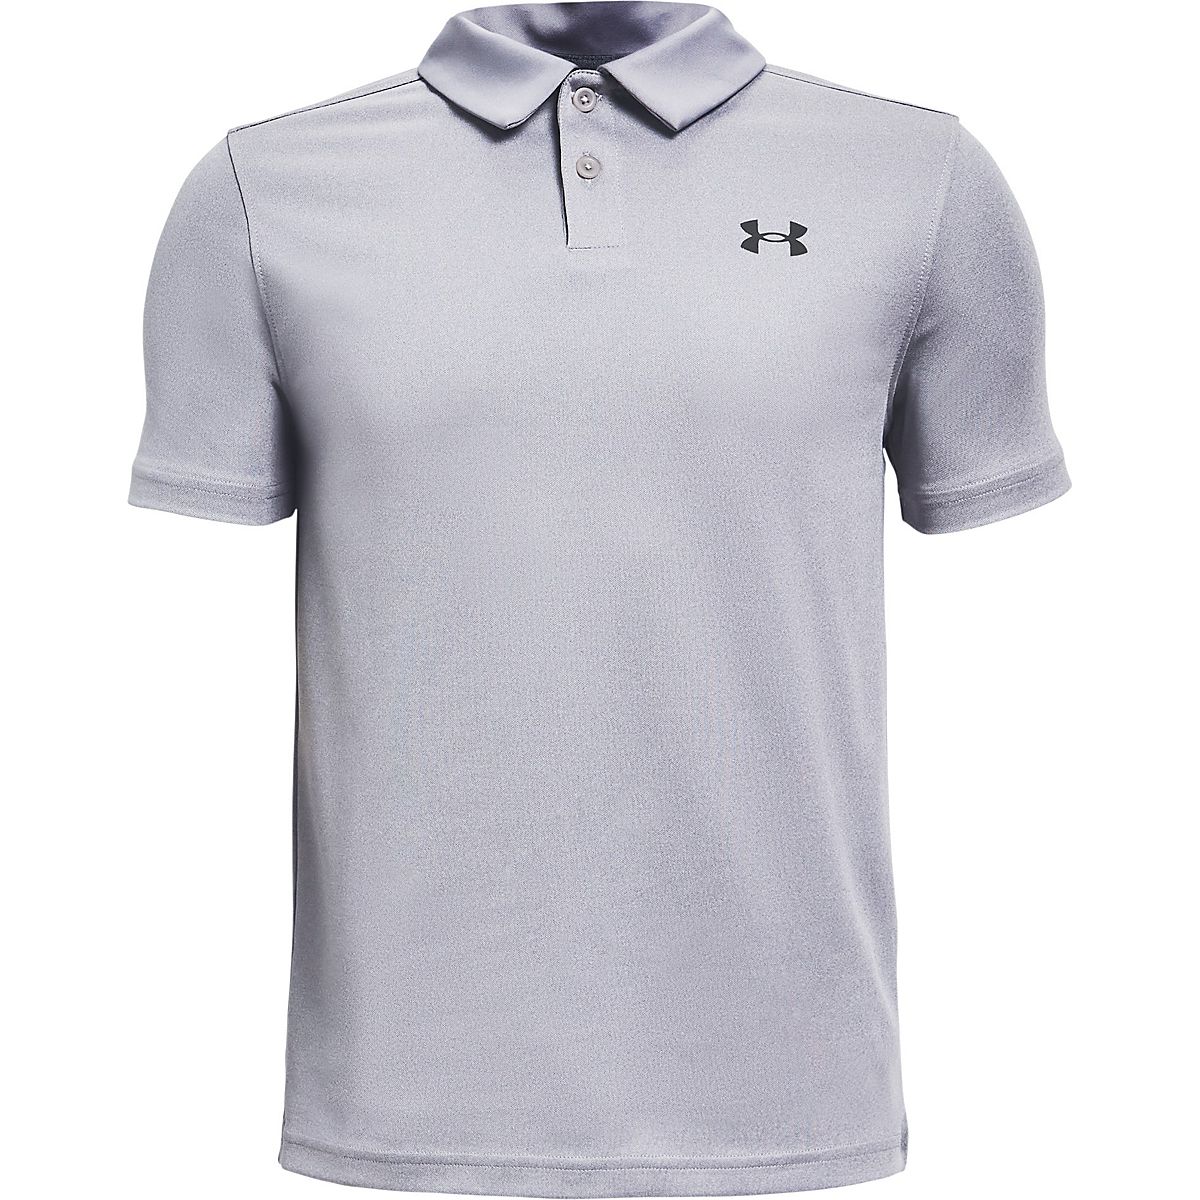 Under Armour, Shirts, Chicago Cubs Golf Polo